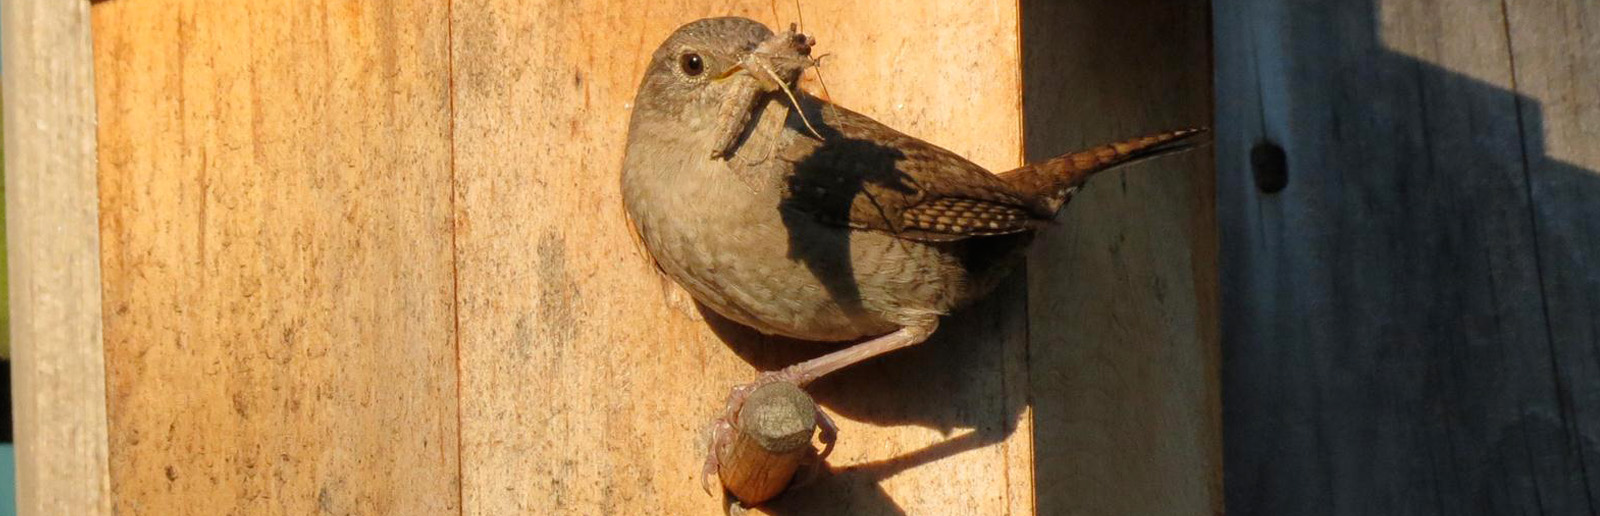 Wren eating insect pests from your garden